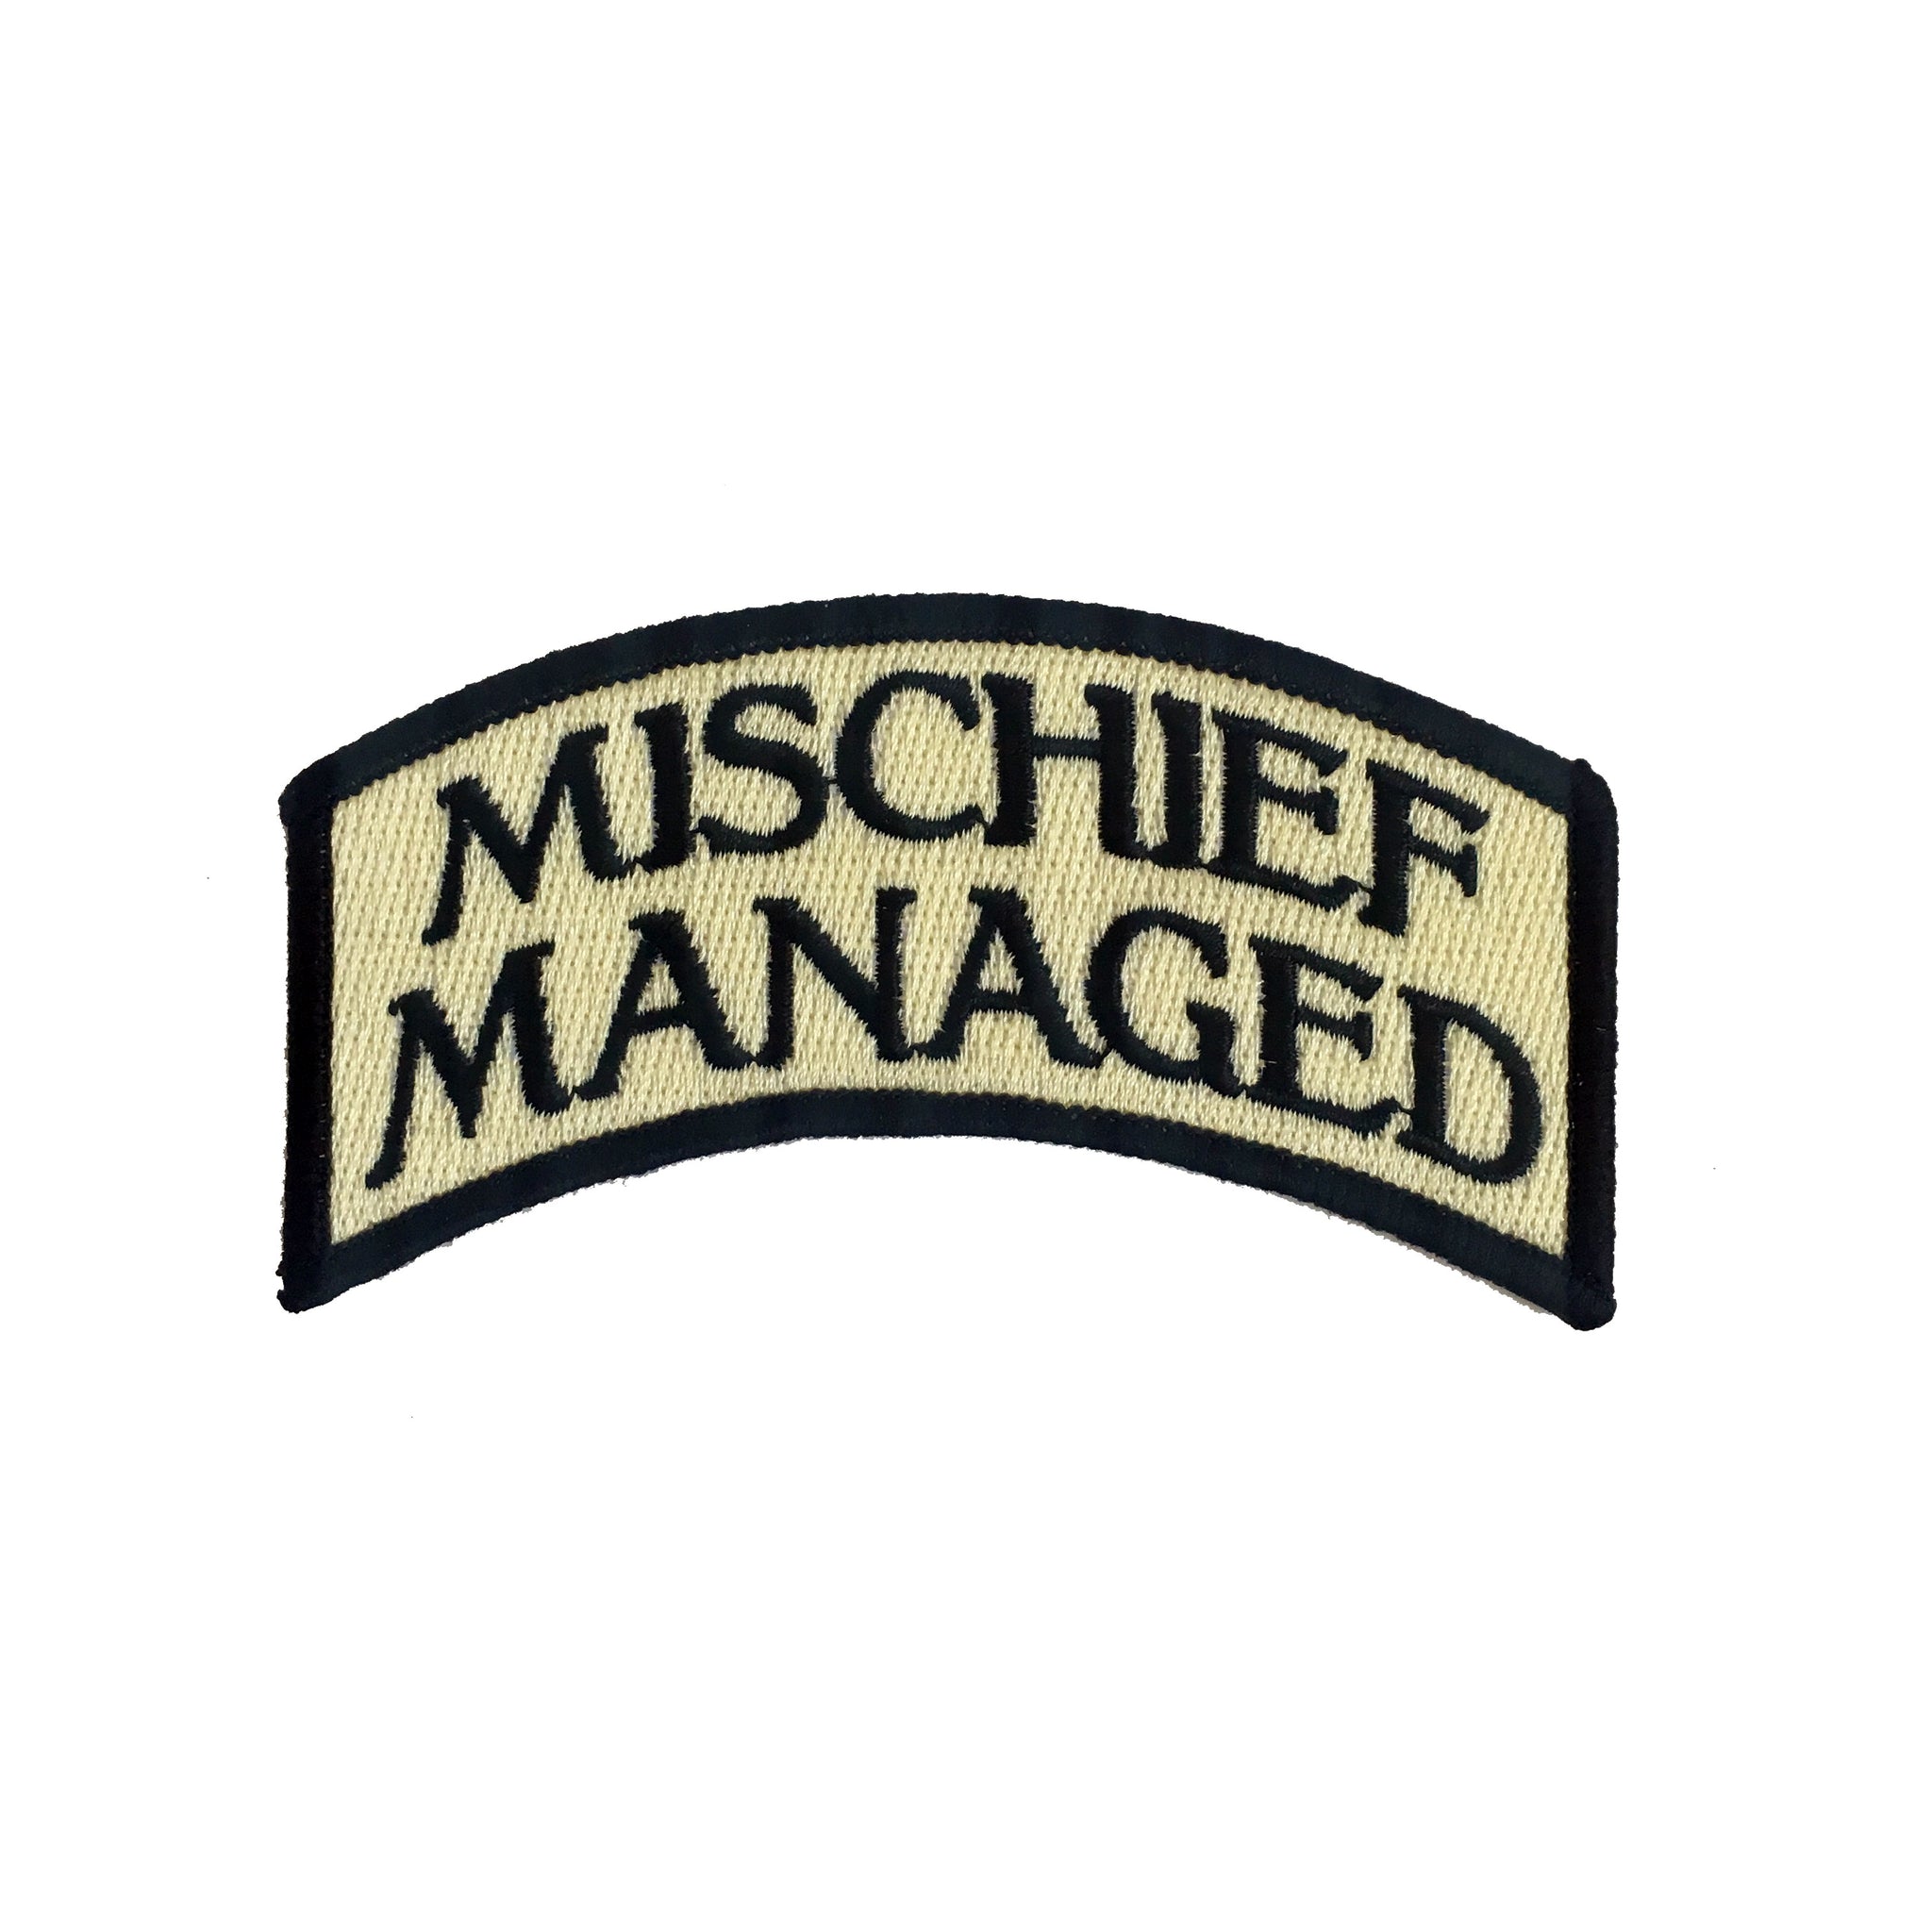 Mischief Managed Iron-On Patch